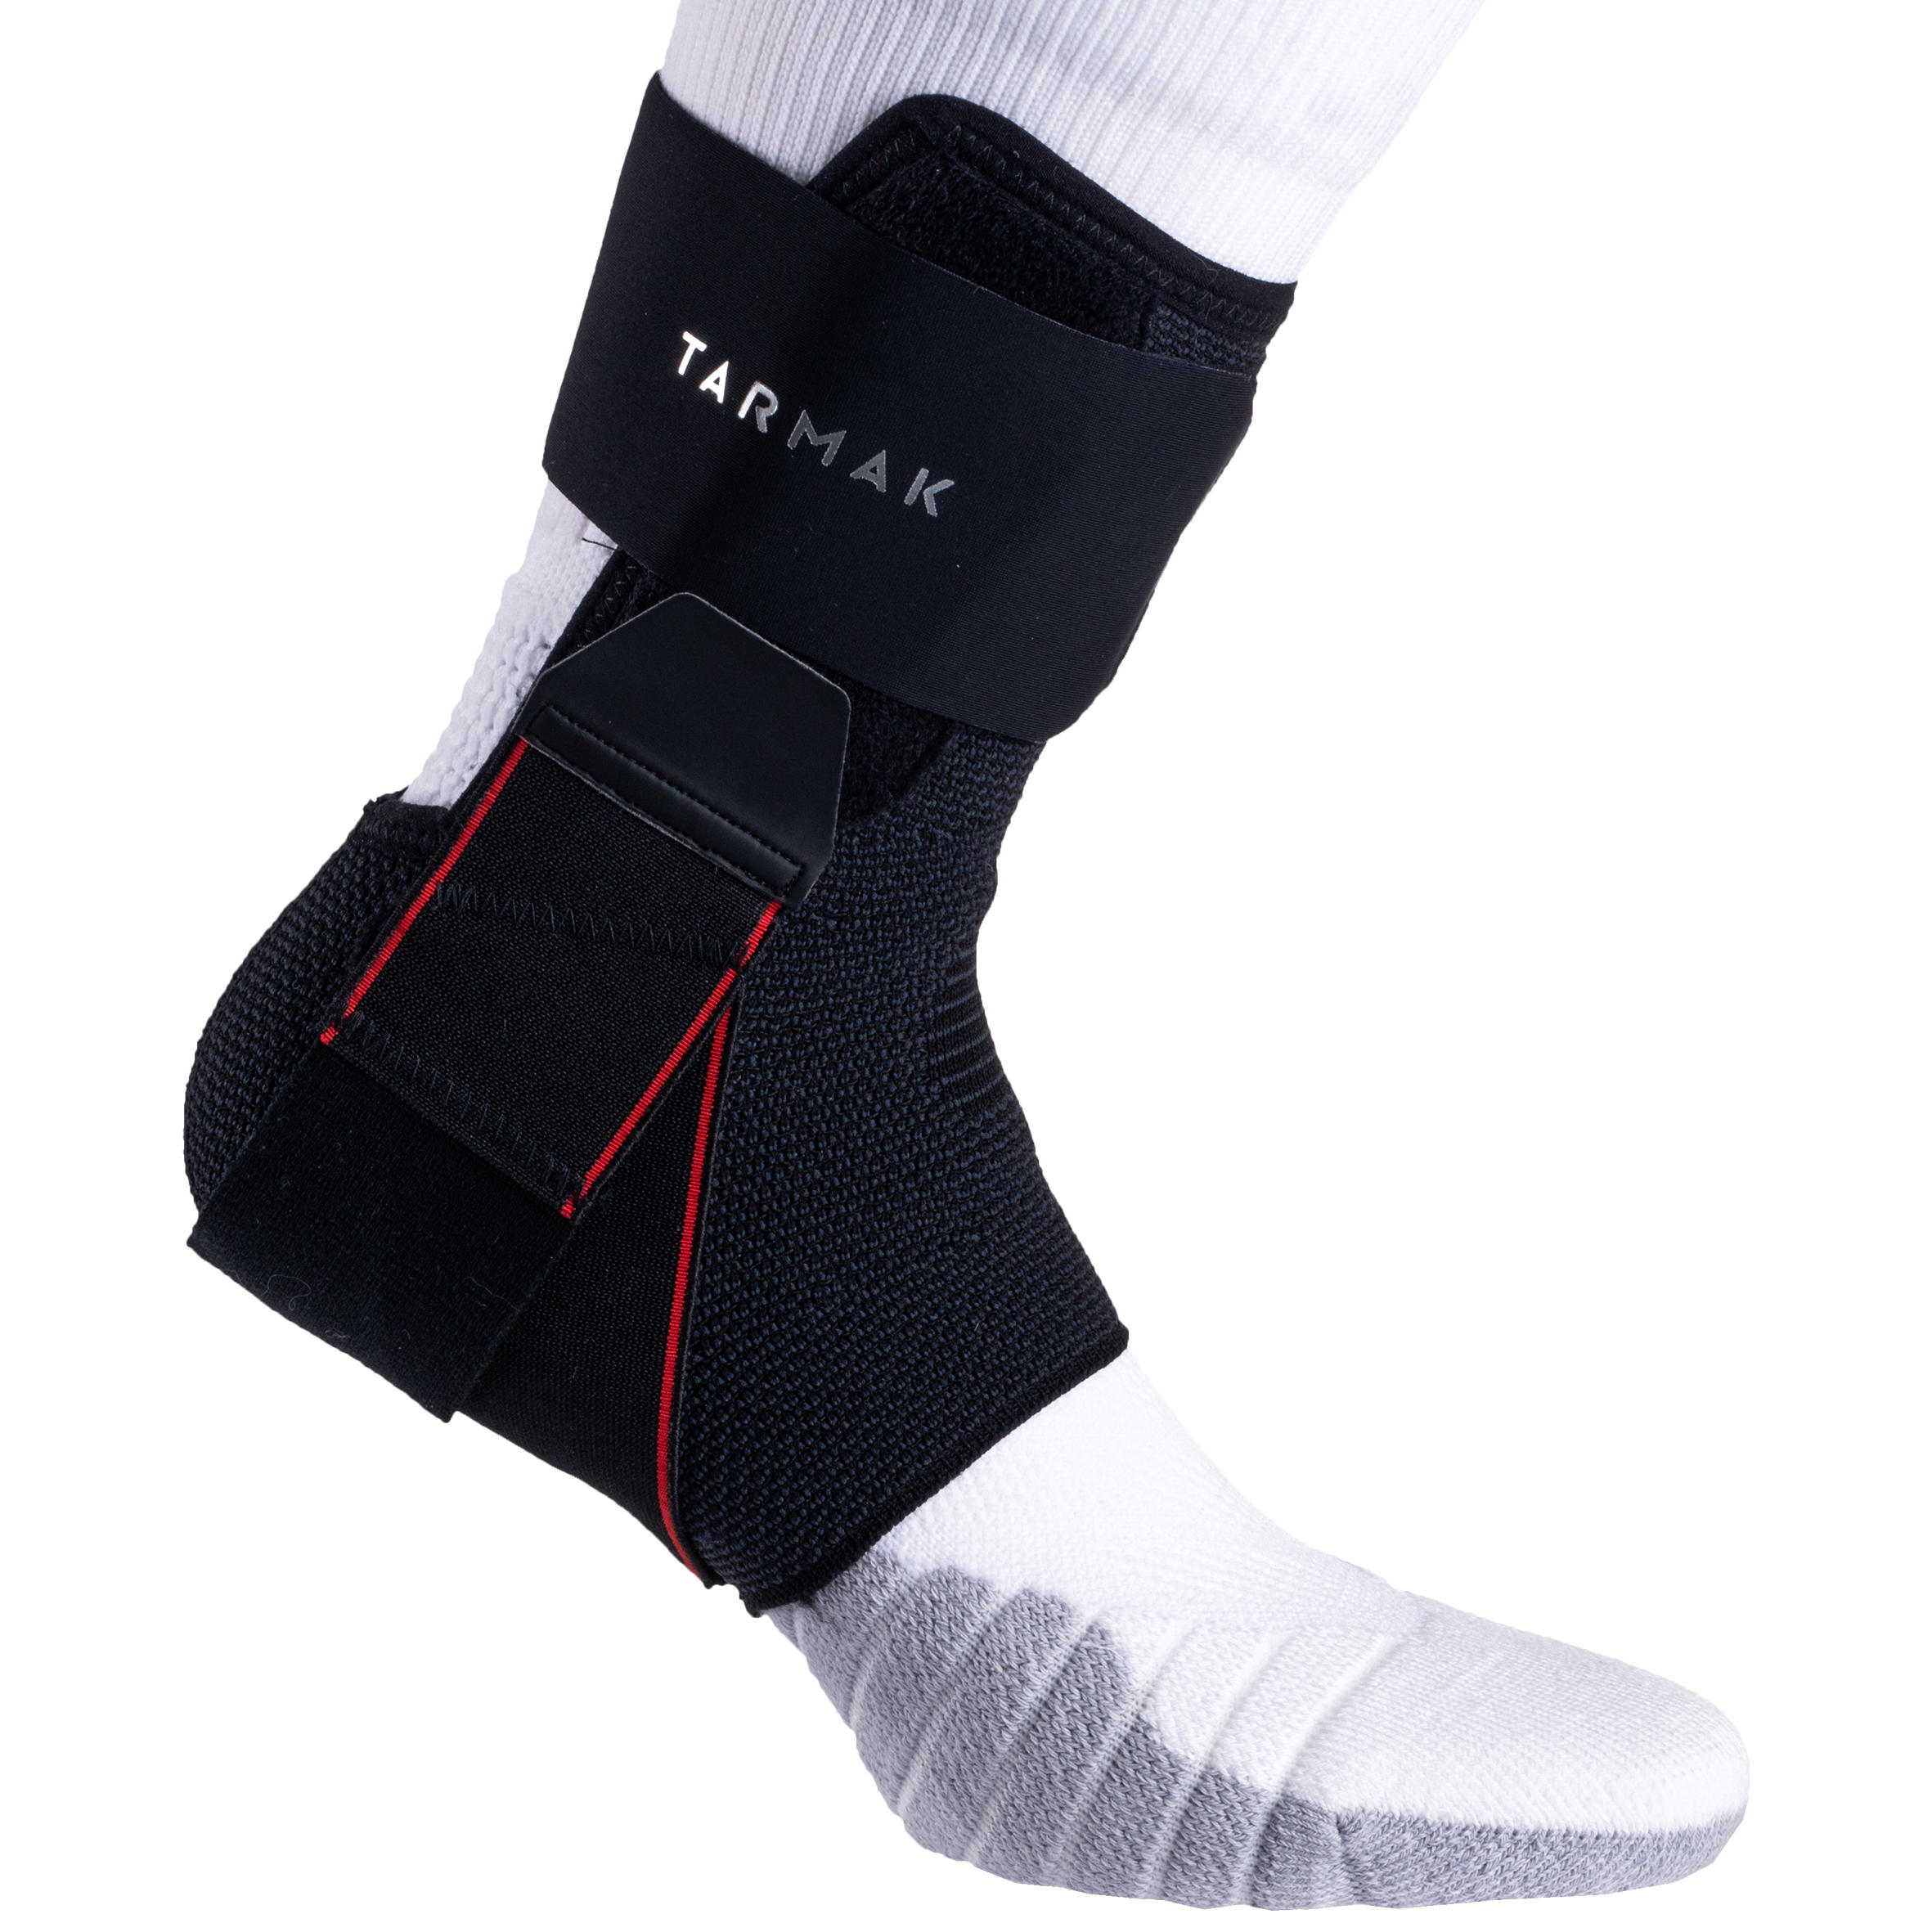 Right/Left Ankle Ligament Support - Strong 500 Dark Grey - TARMAK